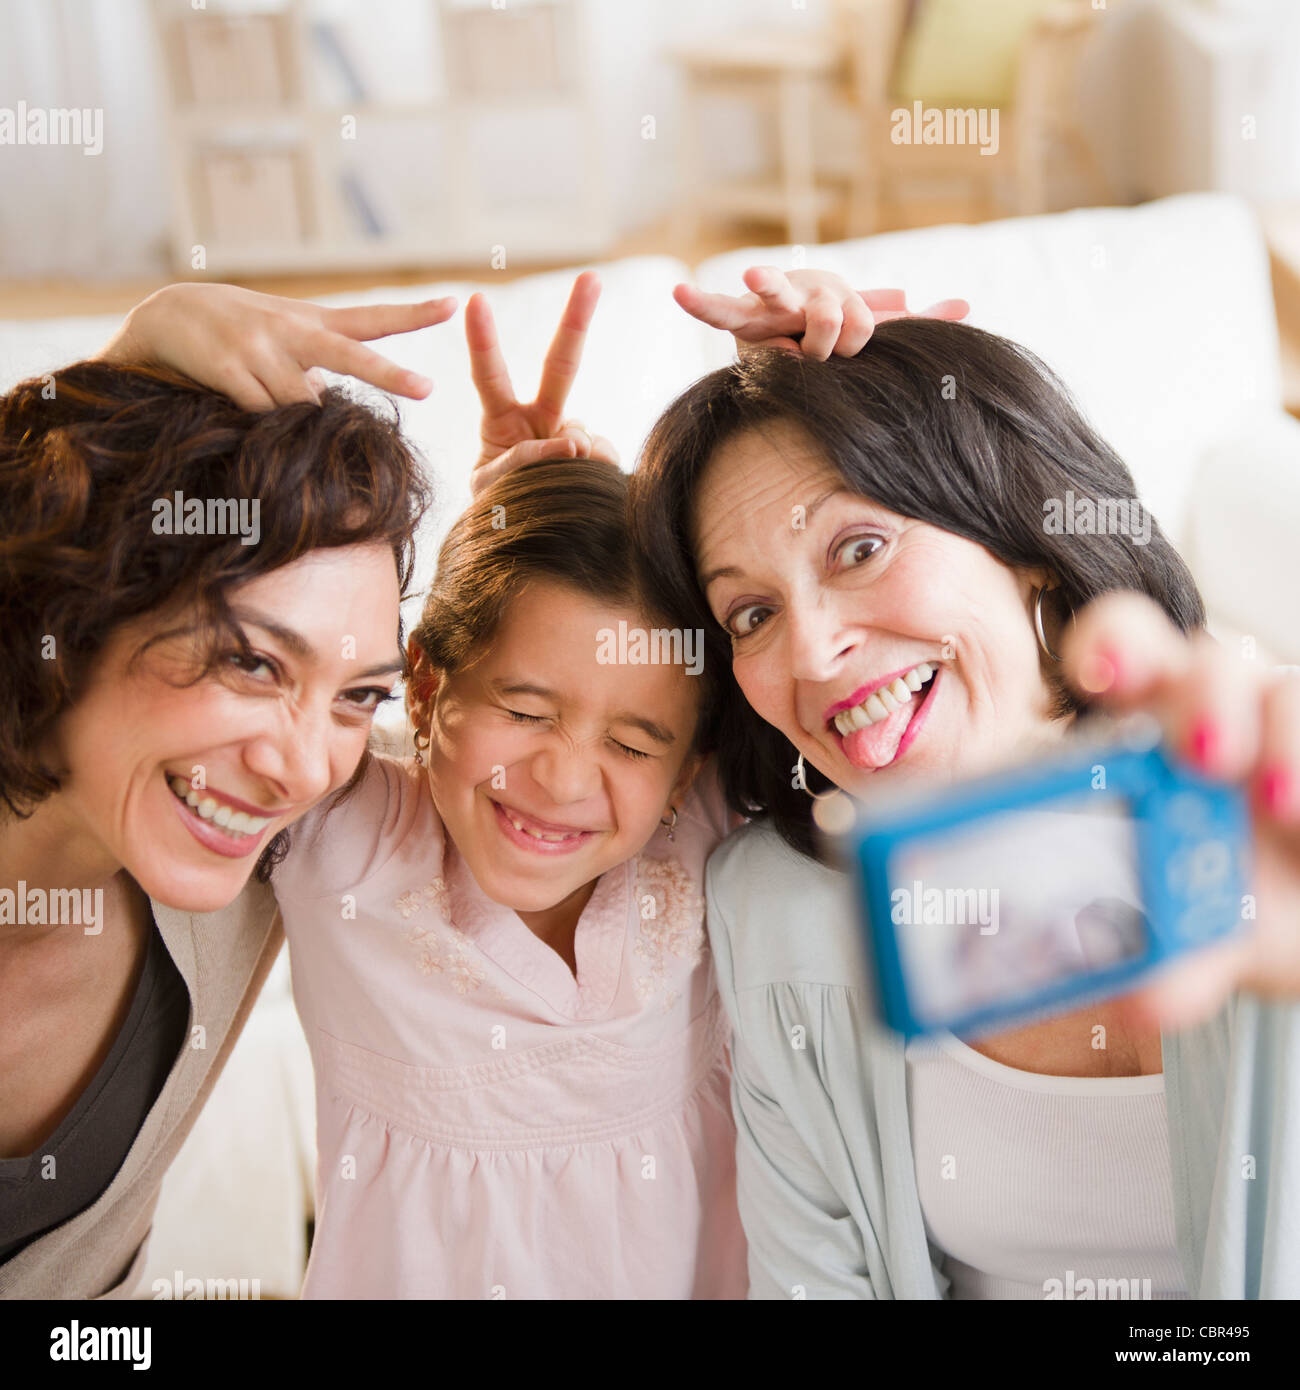 Family taking self-portrait with digital camera Stock Photo